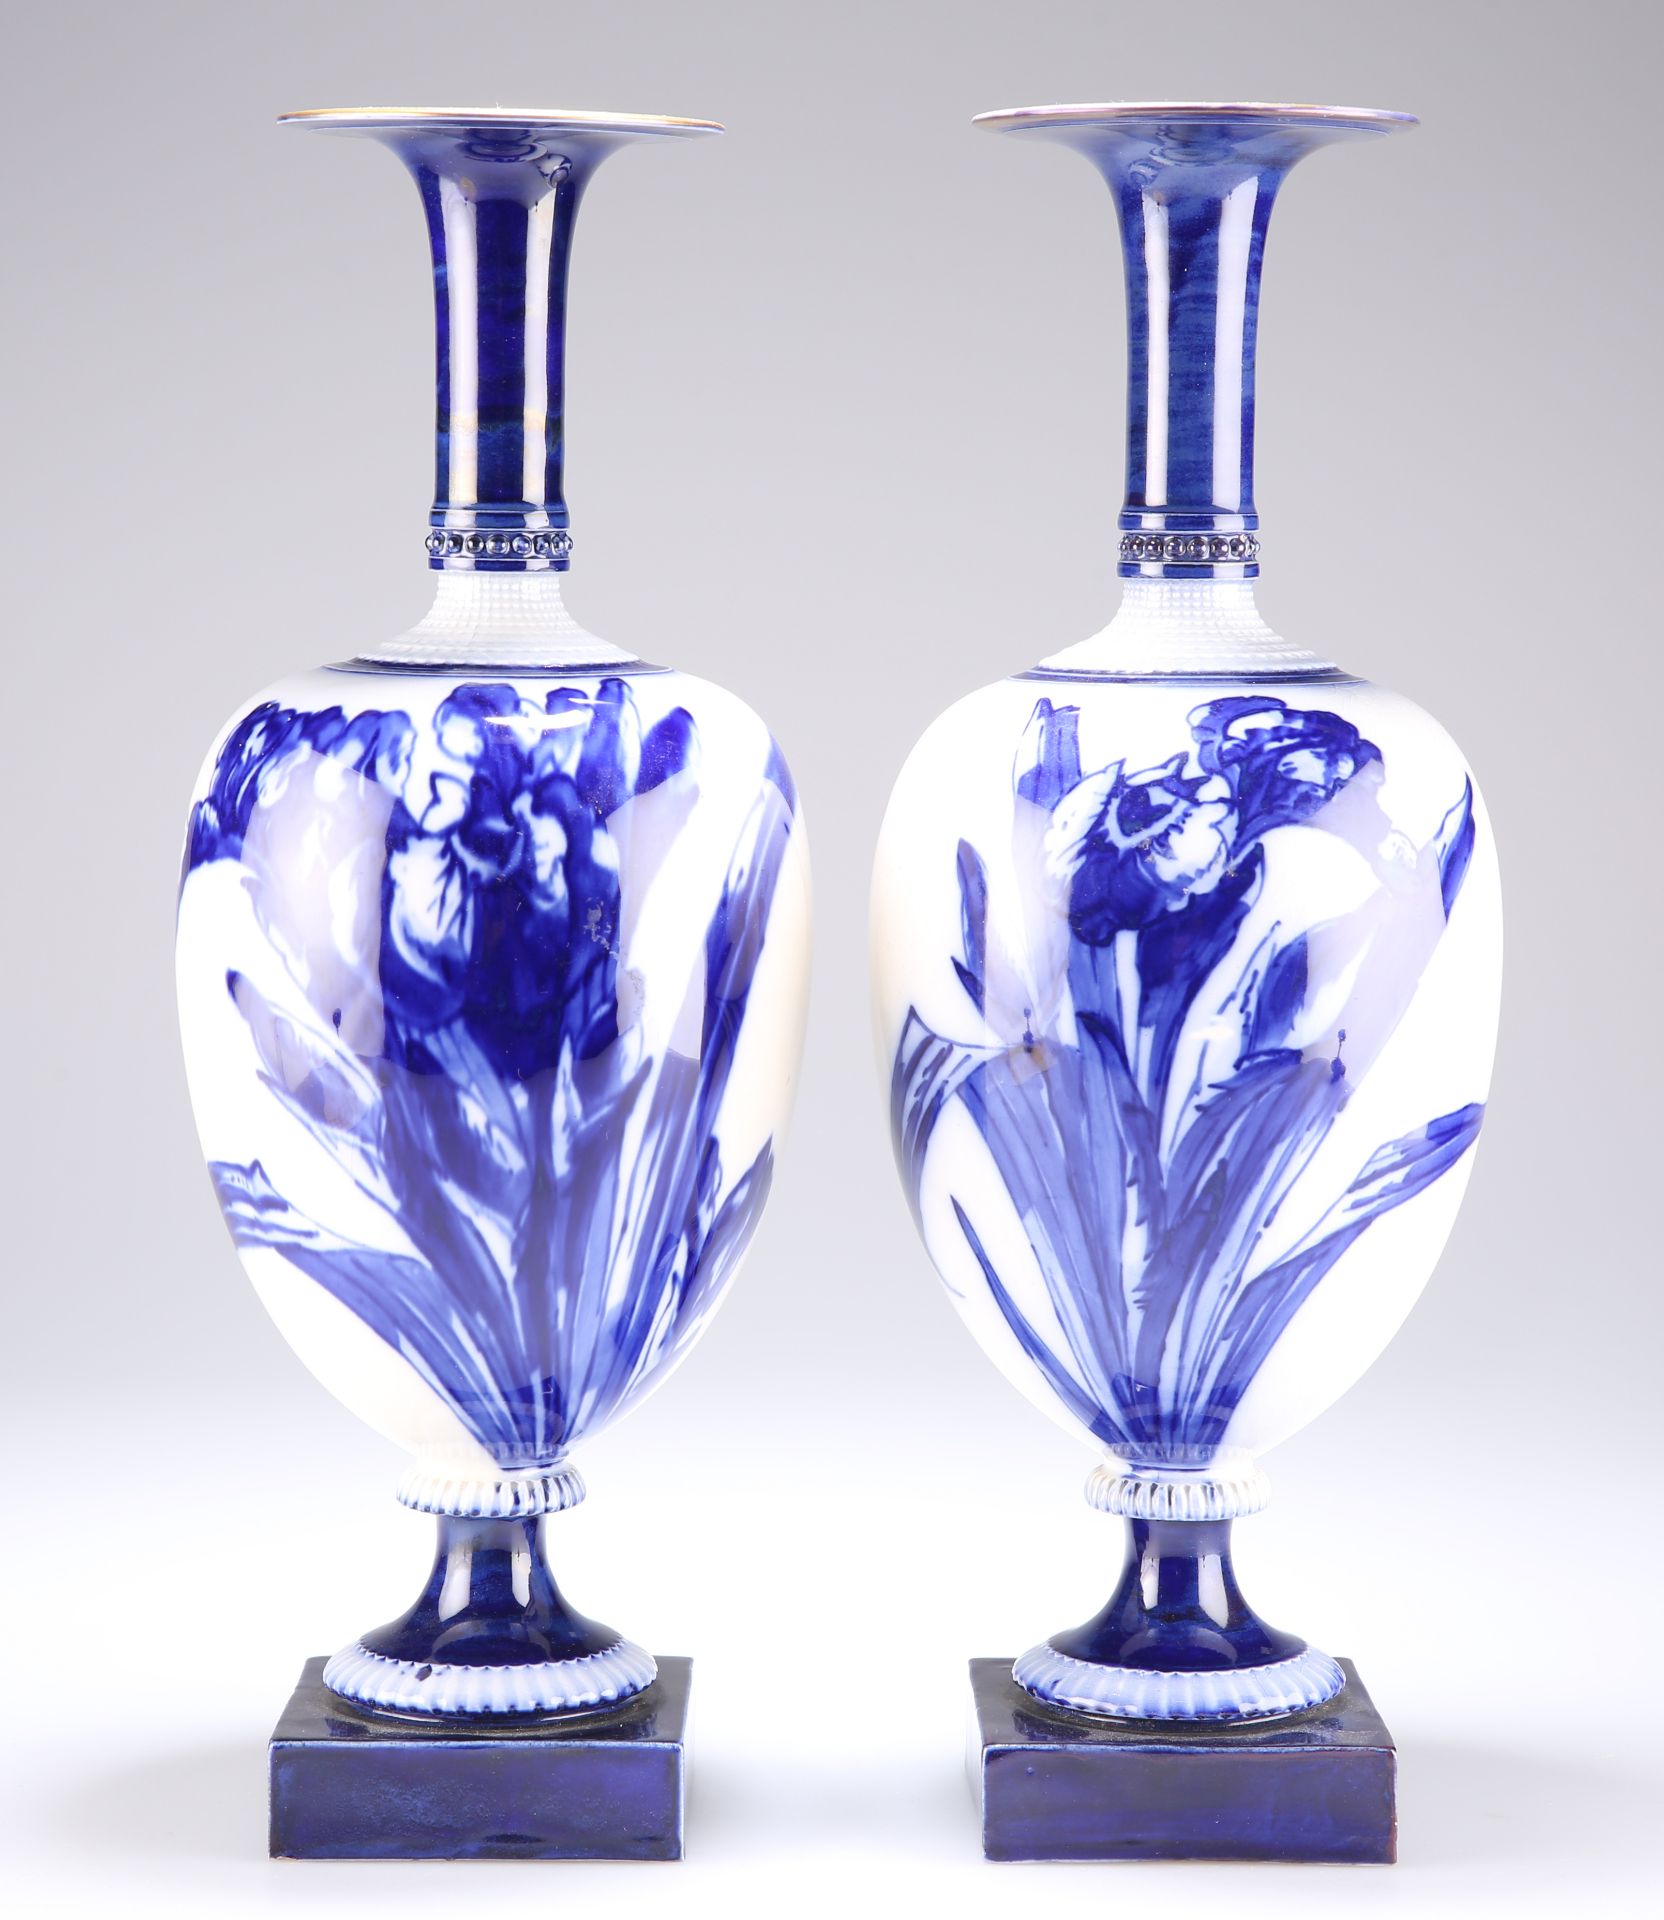 A PAIR OF ROYAL DOULTON FLOW BLUE VASES, EARLY 20TH CENTURY, the onion-shaped bodies decorated